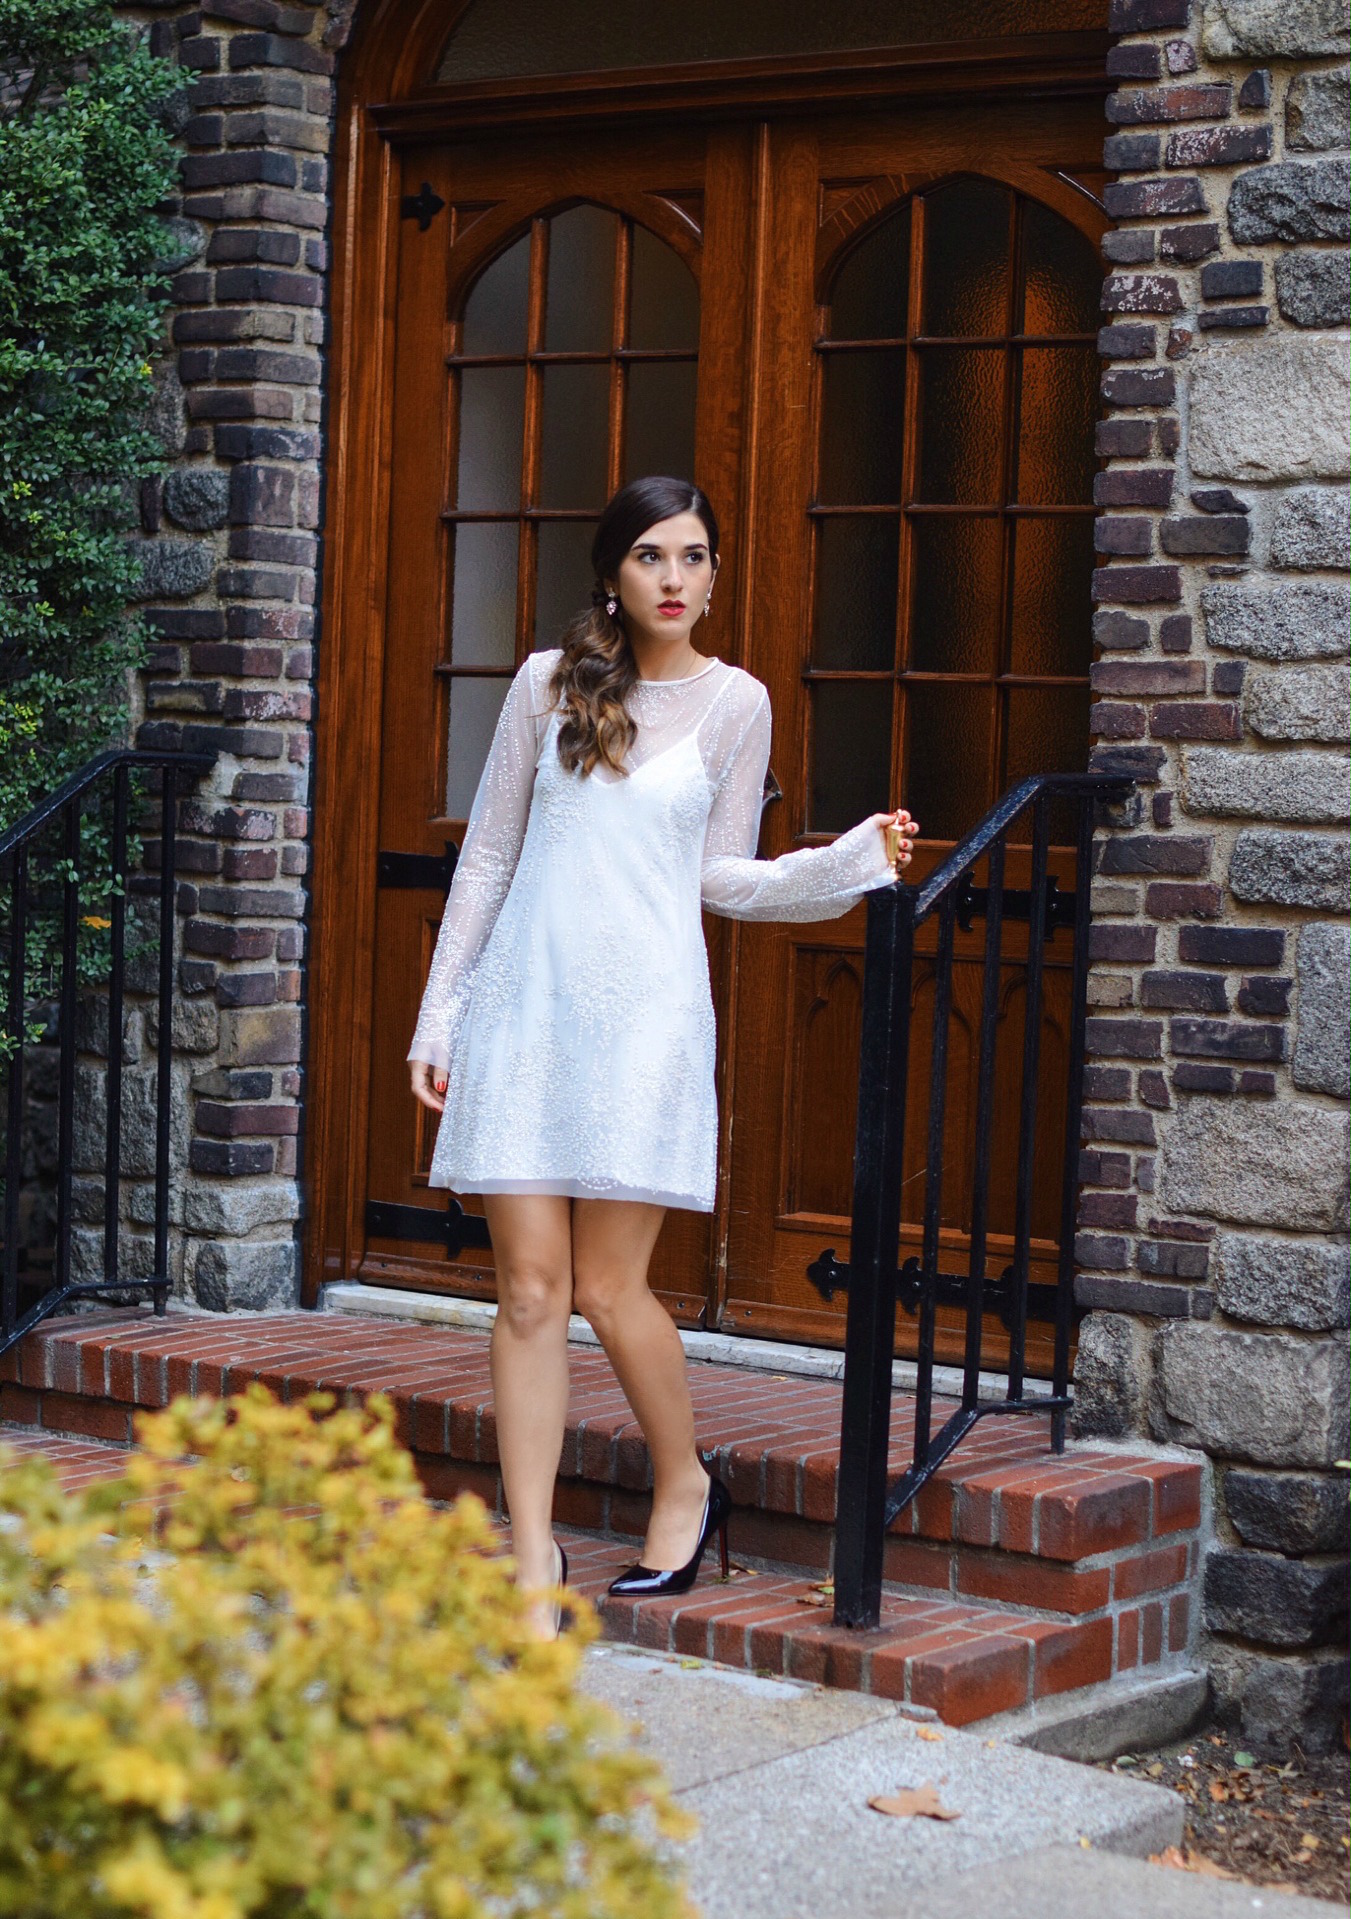 Holiday Look White Glitter Dress Elahn Jewels Louboutins & Love Fashion Blog Esther Santer NYC Street Style Blogger Diamond Rings Earrings Emerald Beautiful Fine Jewelry Girl Women Shopping Model Happiness Boutique  OOTD Outfit Inspo Shoes Black Heels.jpg